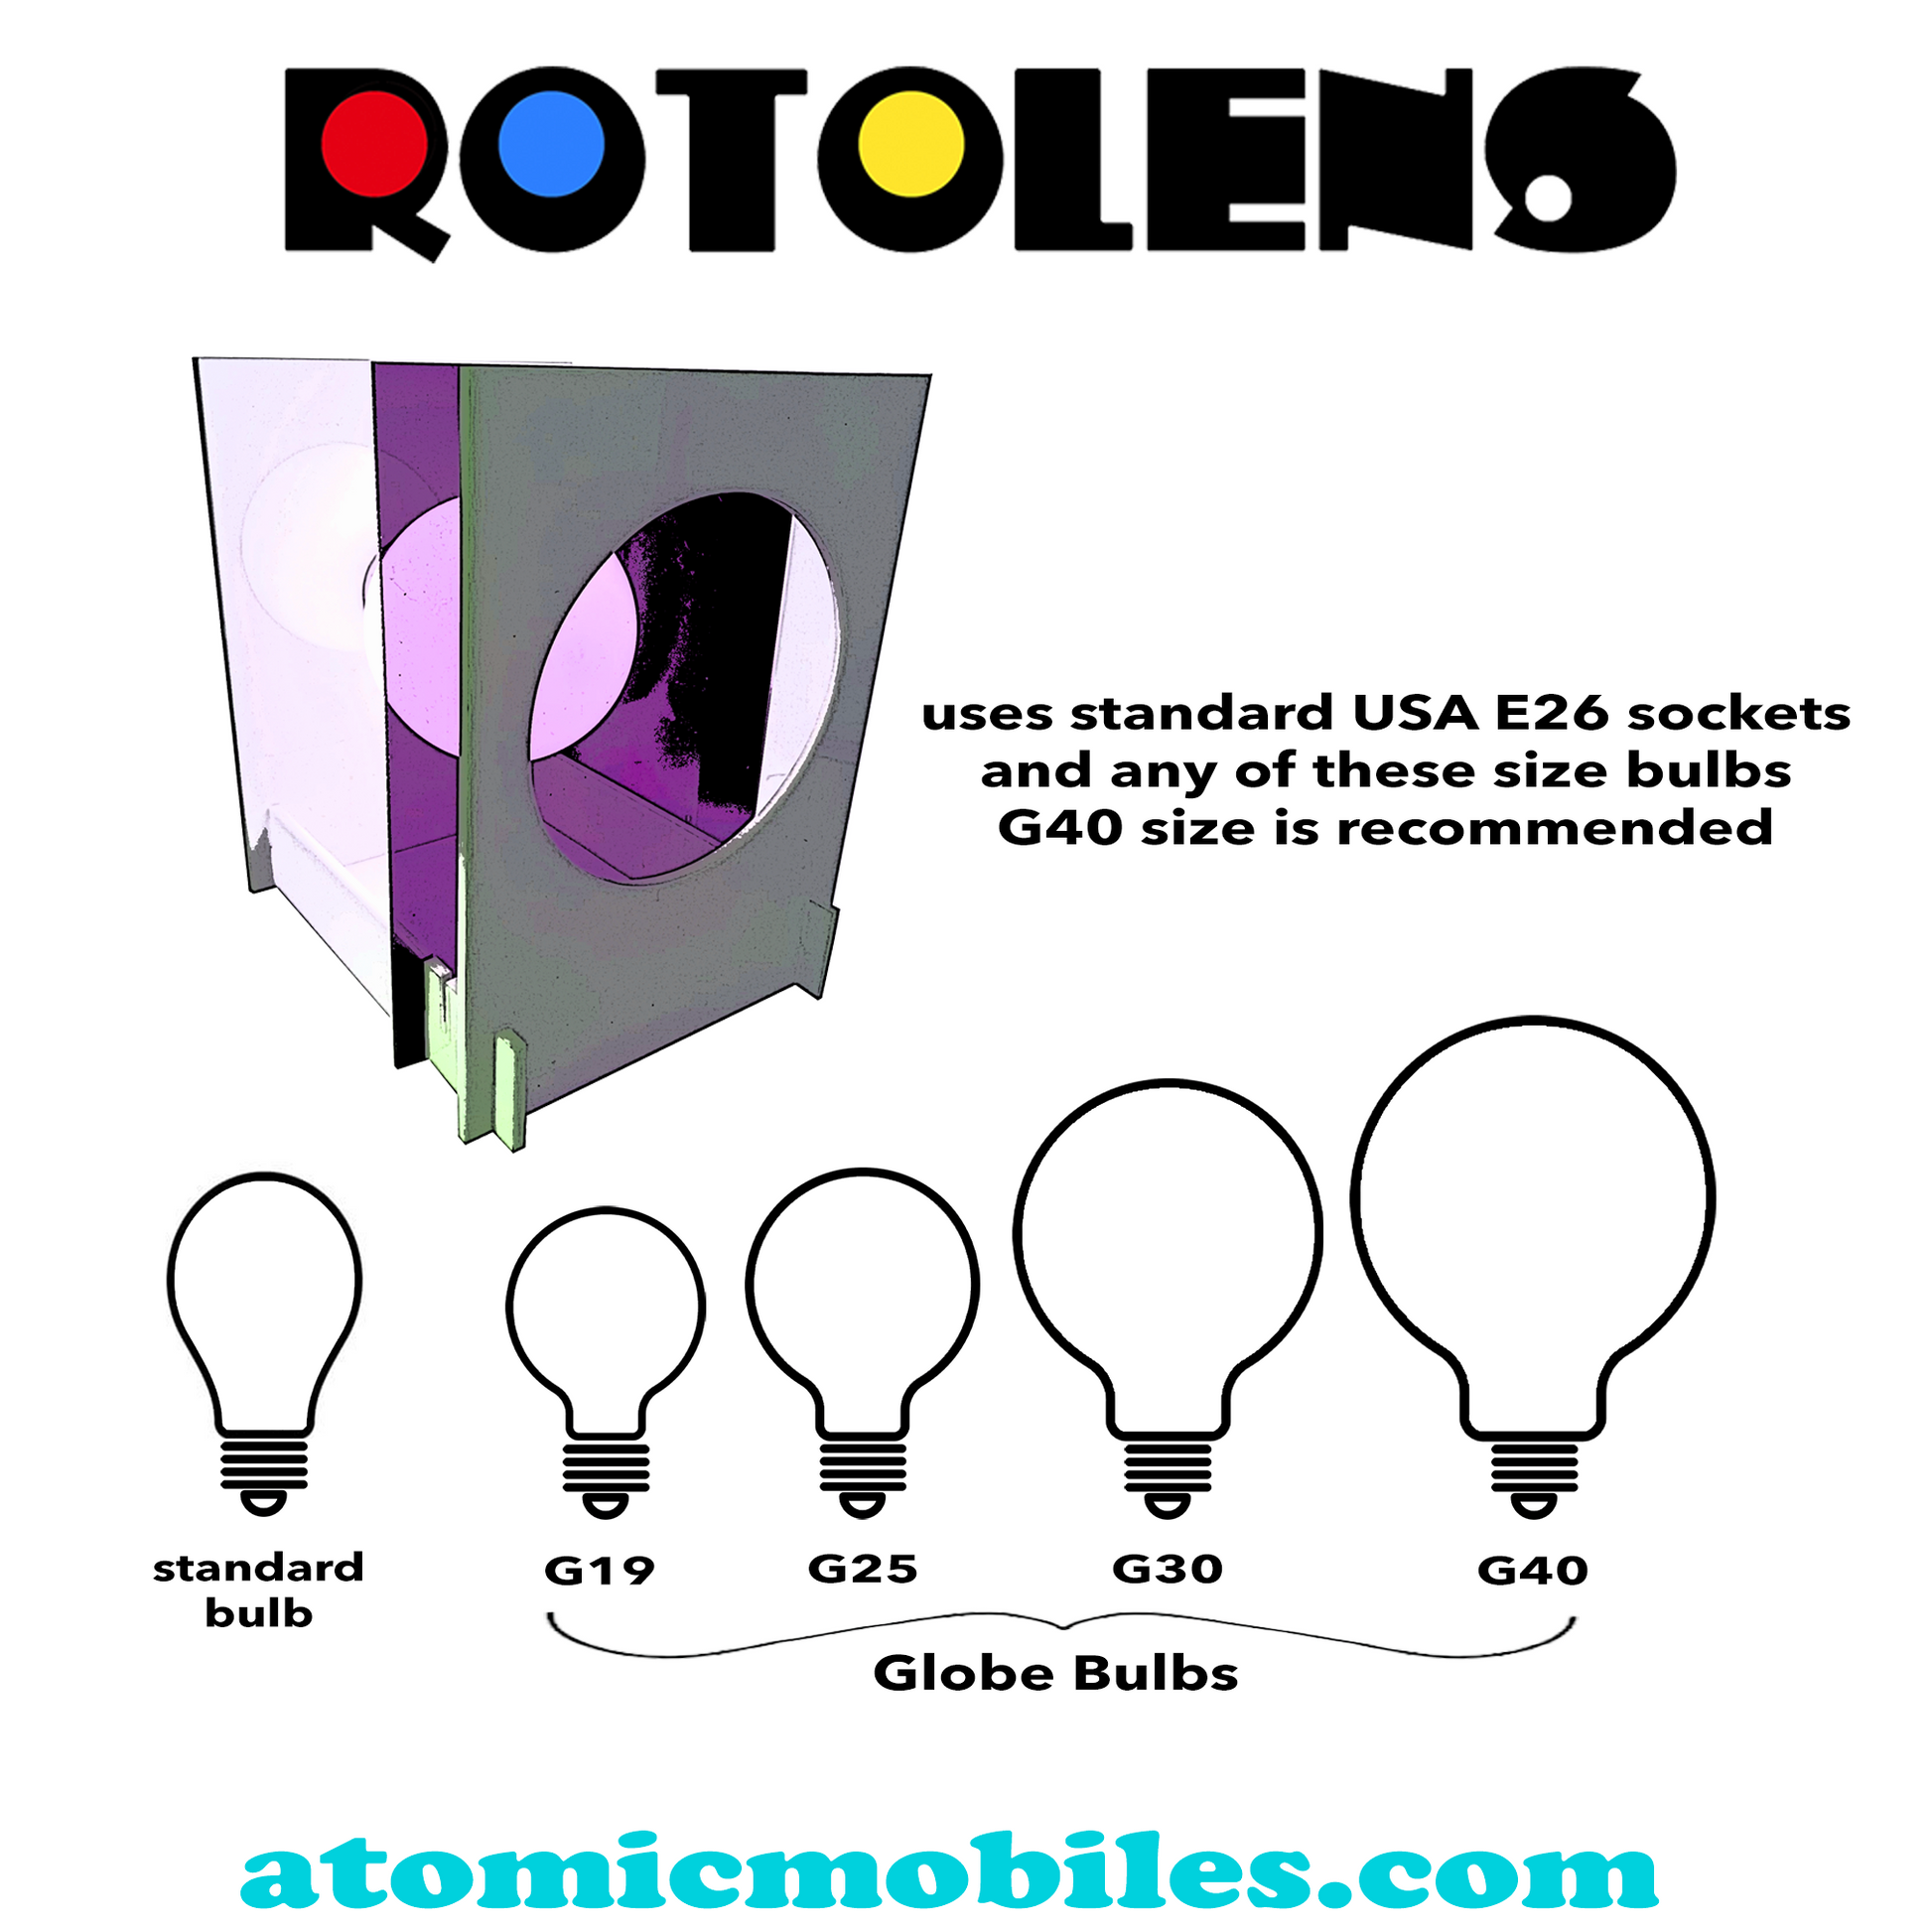 Light Bulb requirements and suggestions for ROTOLENS Space Age Lamp with interchangeable clear plexiglass lens in Purple by AtomicMobiles.com